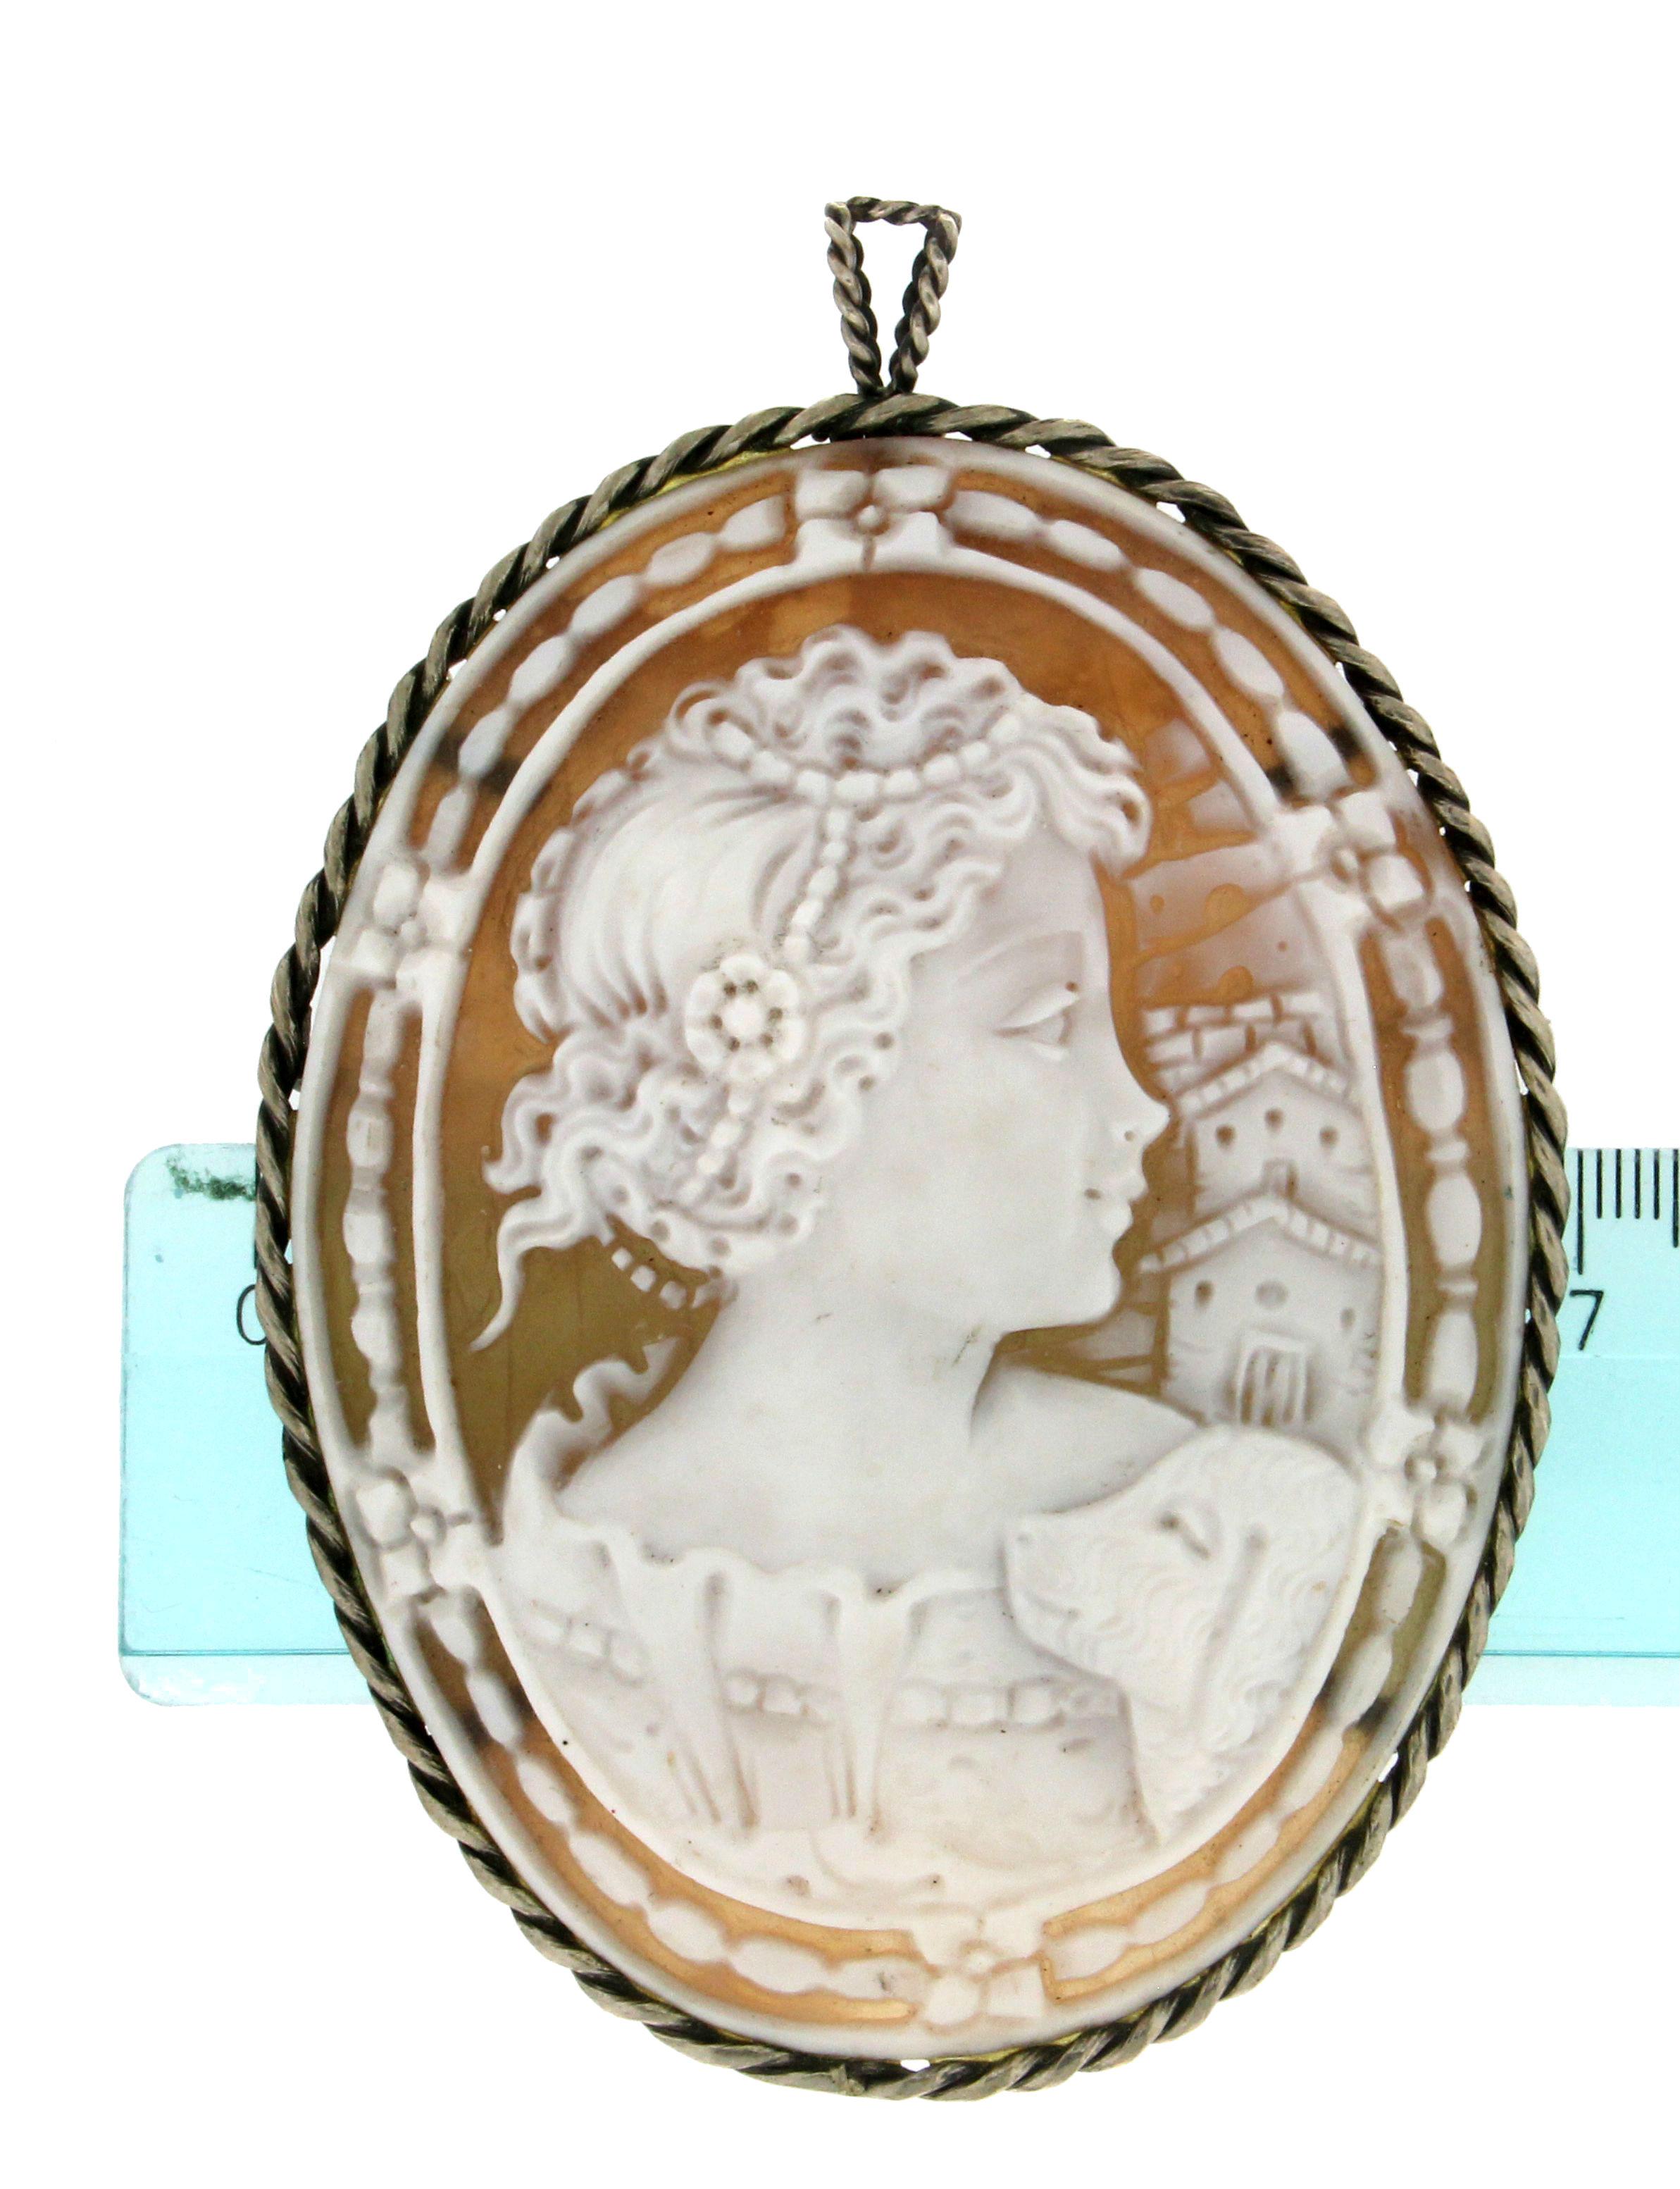 Handcraft Cameo 800 Thousandths Silver Brooch and Pendant Necklace In New Condition For Sale In Marcianise, IT